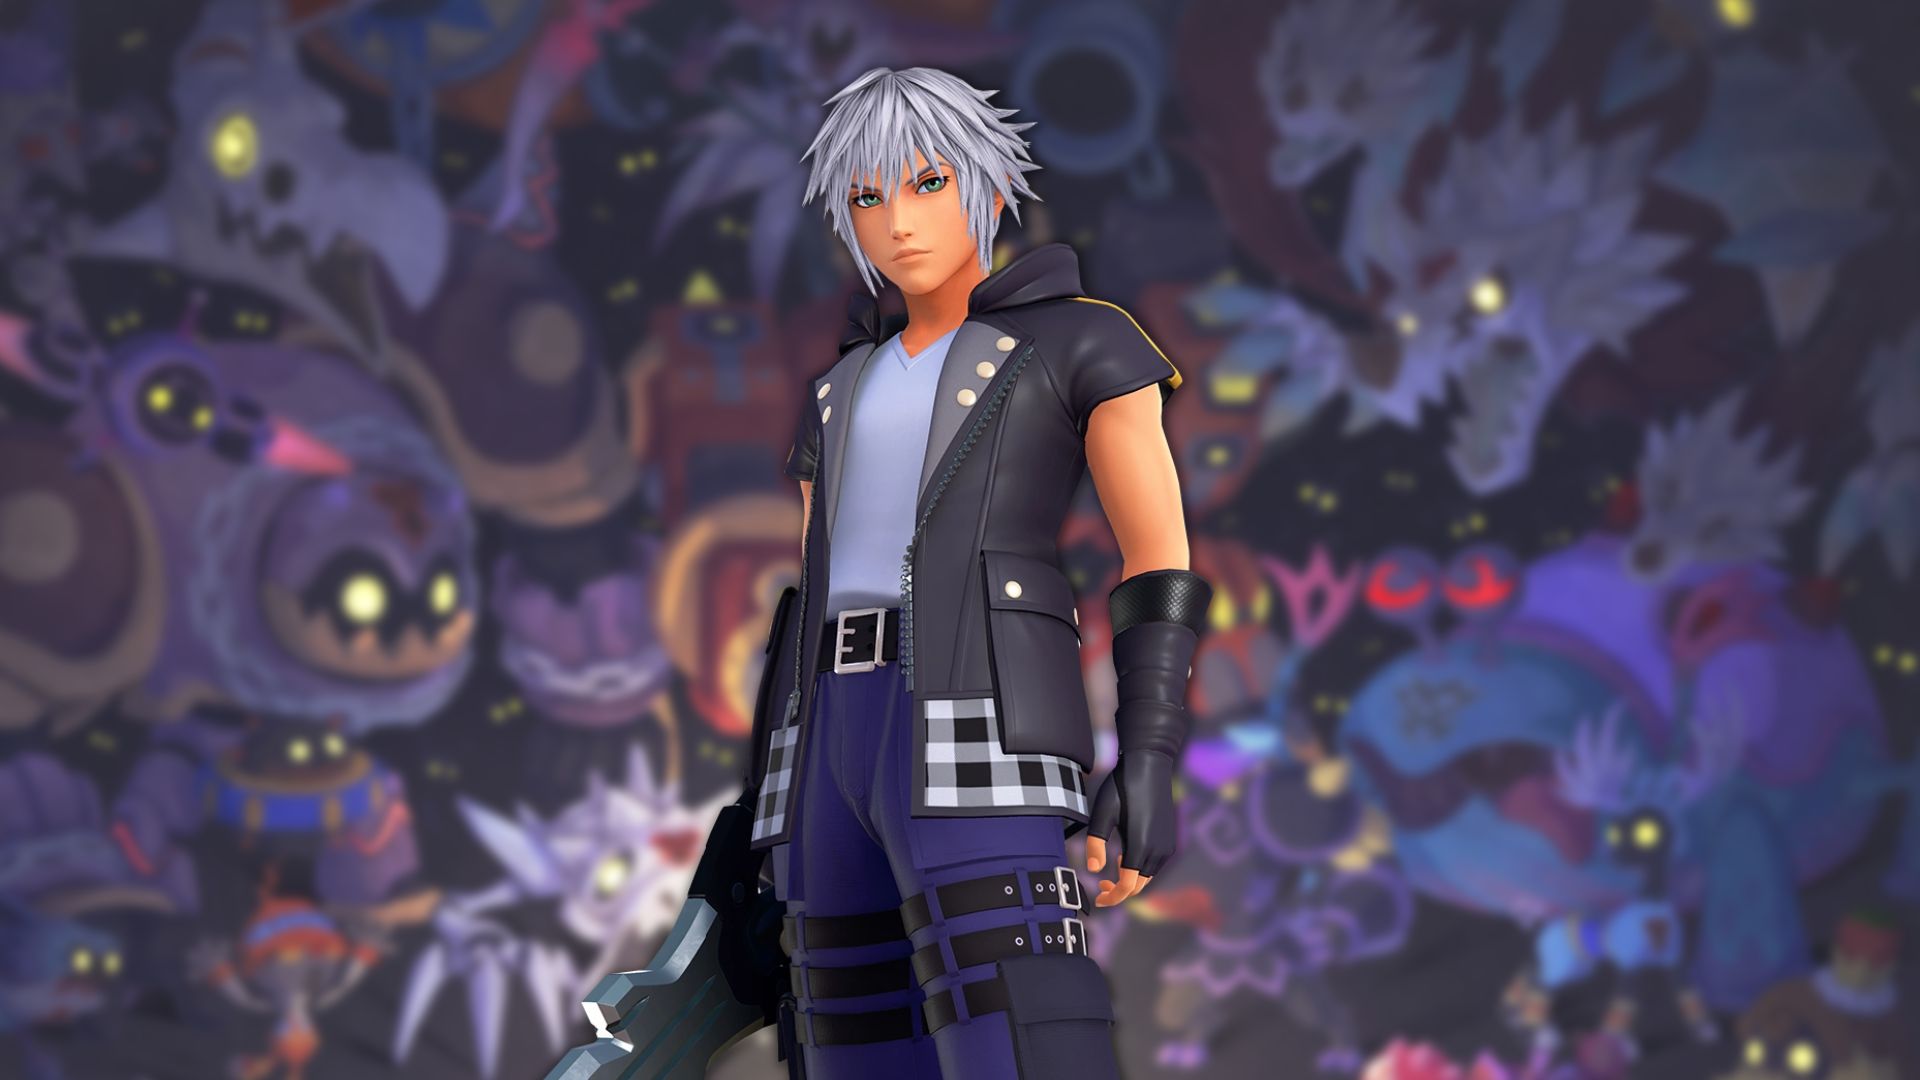 Kingdom Hearts Riku keyblade, voice actor, and more